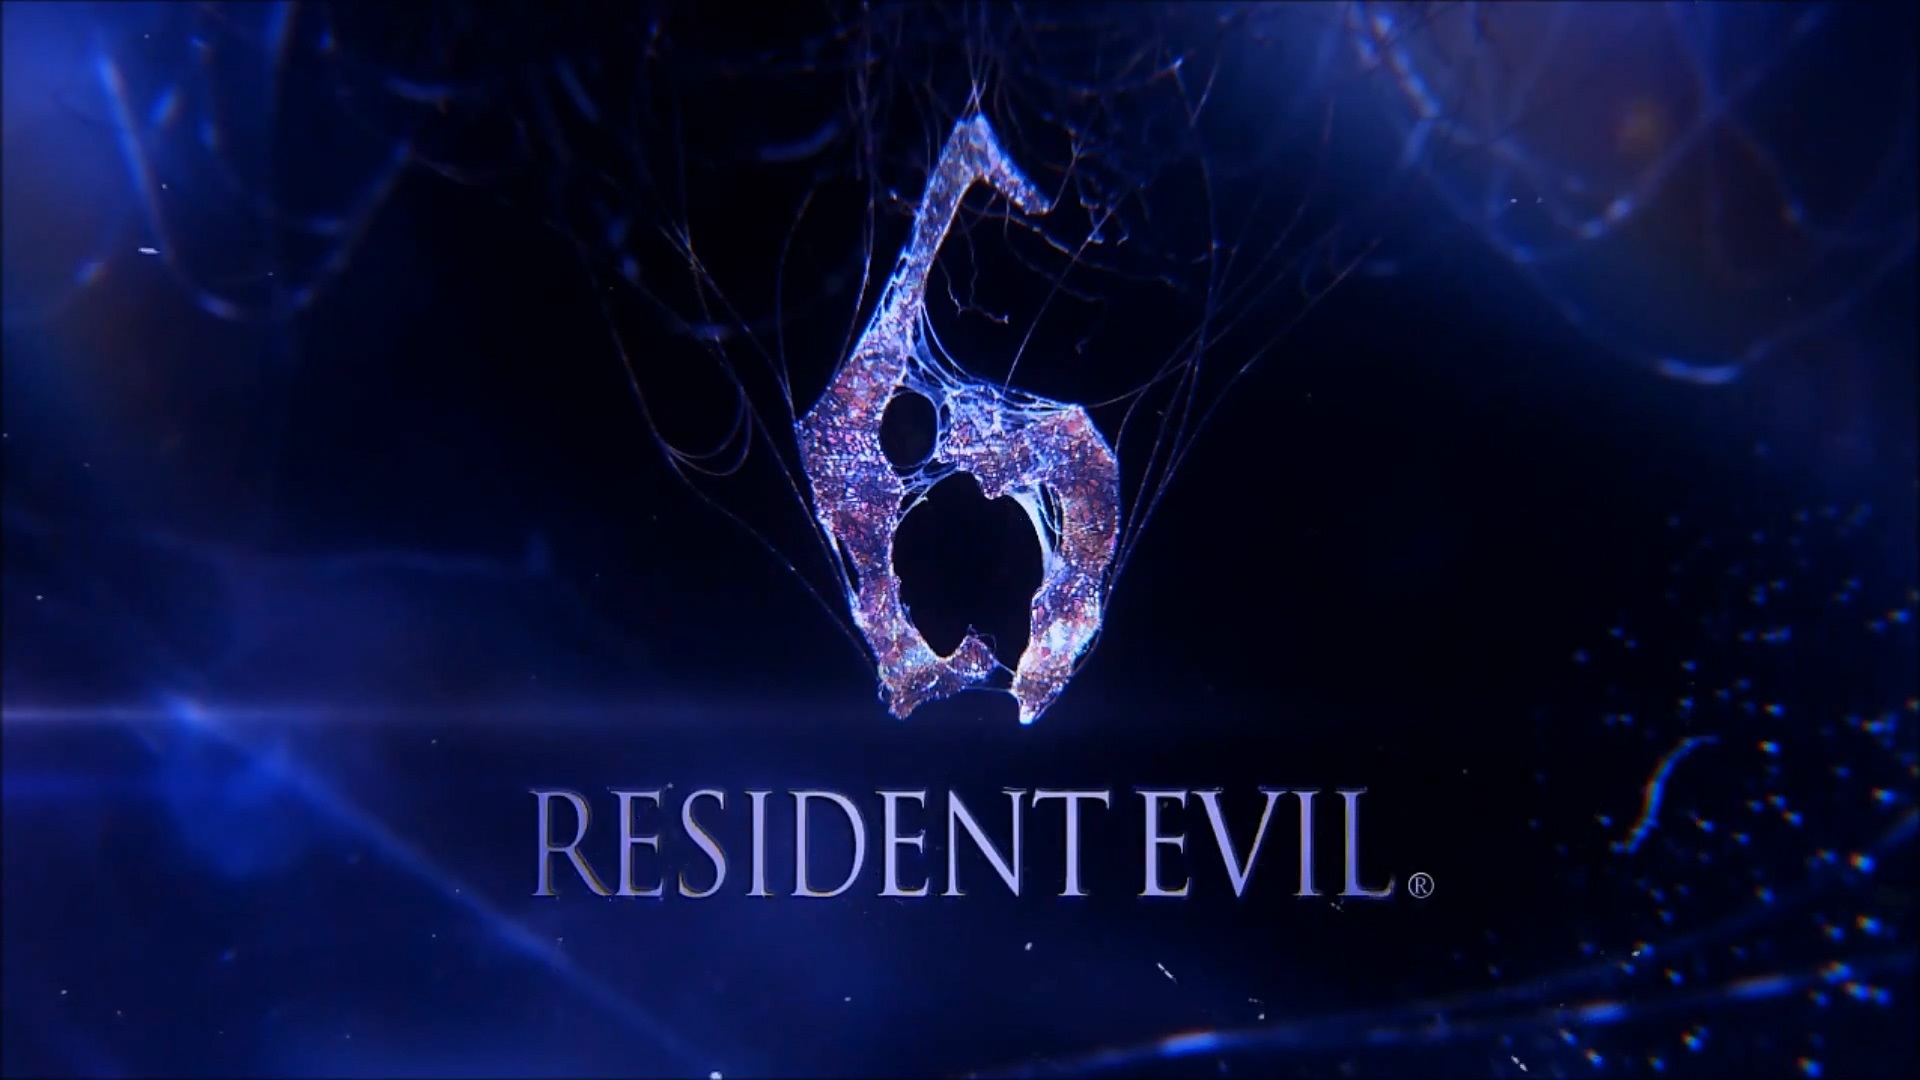 Resident Evil 6 HD game wallpapers #3 - 1920x1080